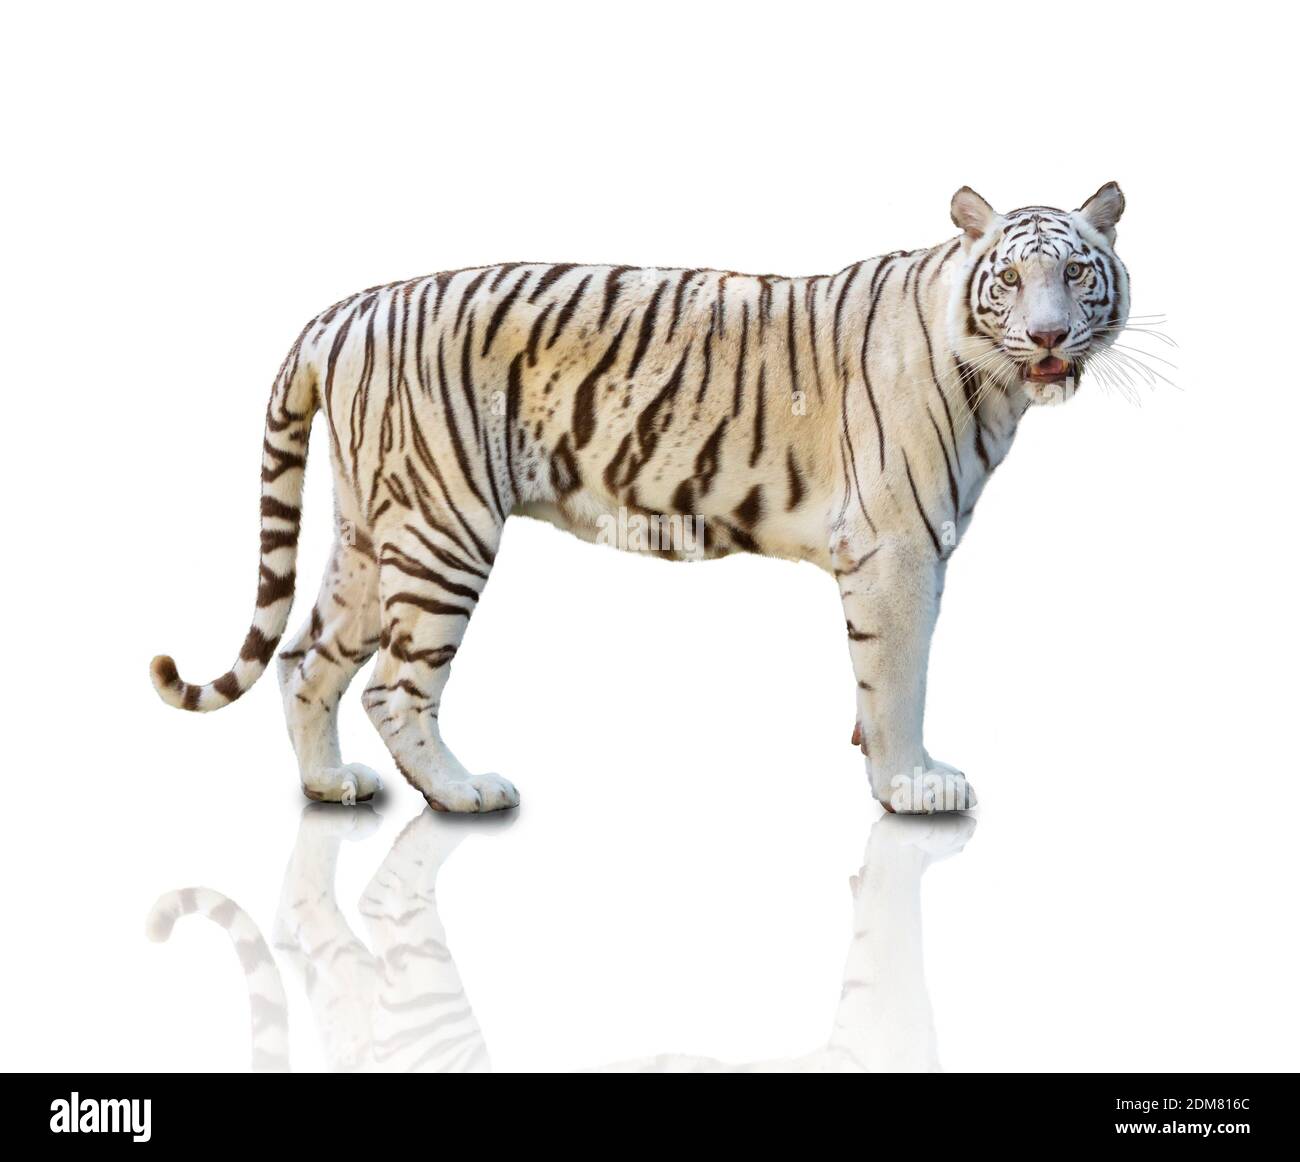 Portrait Of White Tiger Standing On White Background Stock Photo - Alamy